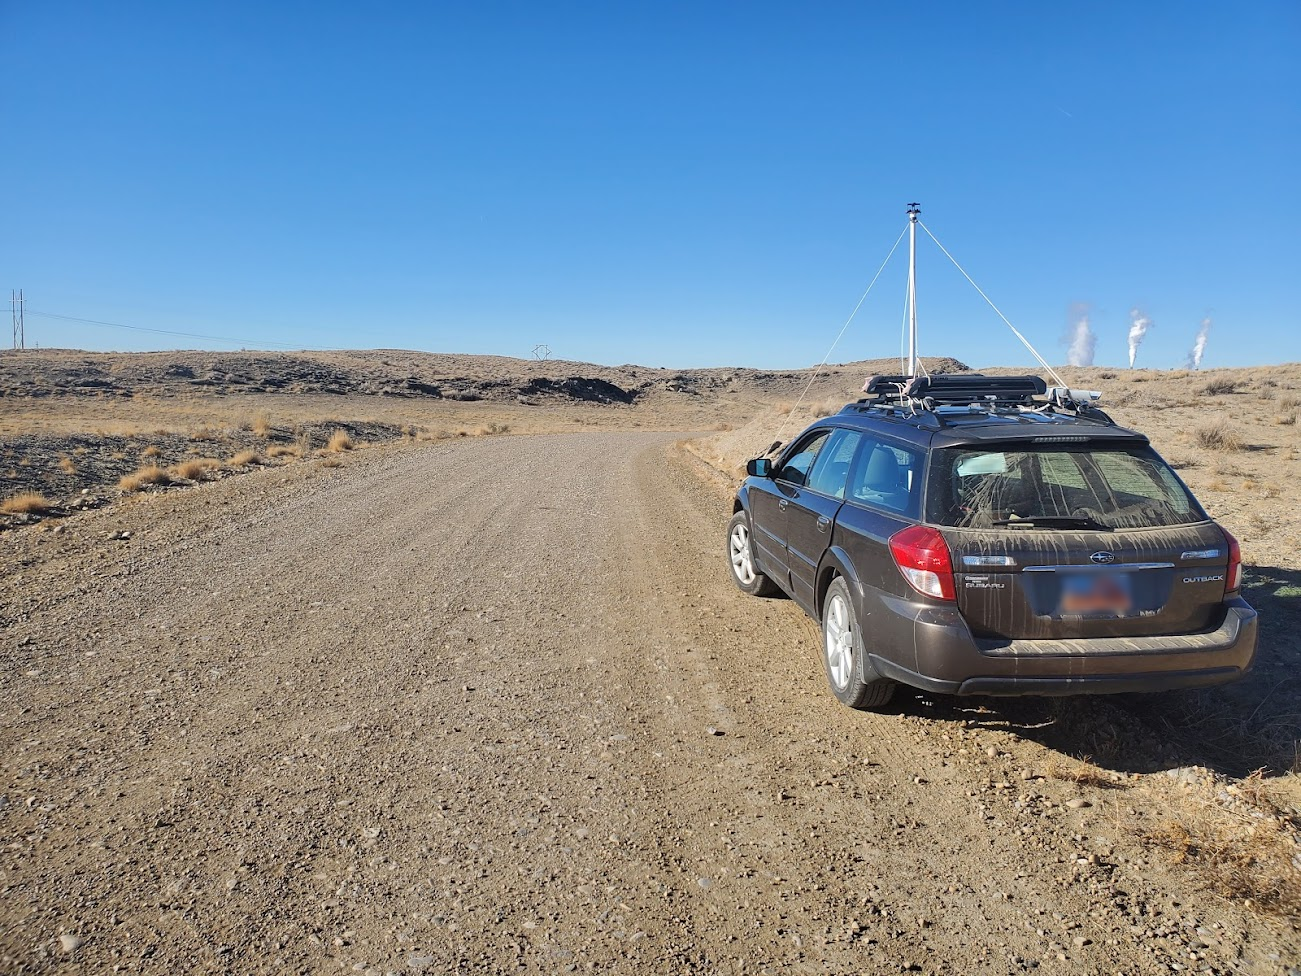 A hatchback car is parked on the side of a dirt road adjacent to short grasses. The roof of the car is equipped with environmental monitoring equipment, including a TriSonica<sup>®</sup> Mini Wind and Weather Sensor and an air intake for a trace gas analyzer. An industrial facility or oil refinery is visible on the distant horizon.